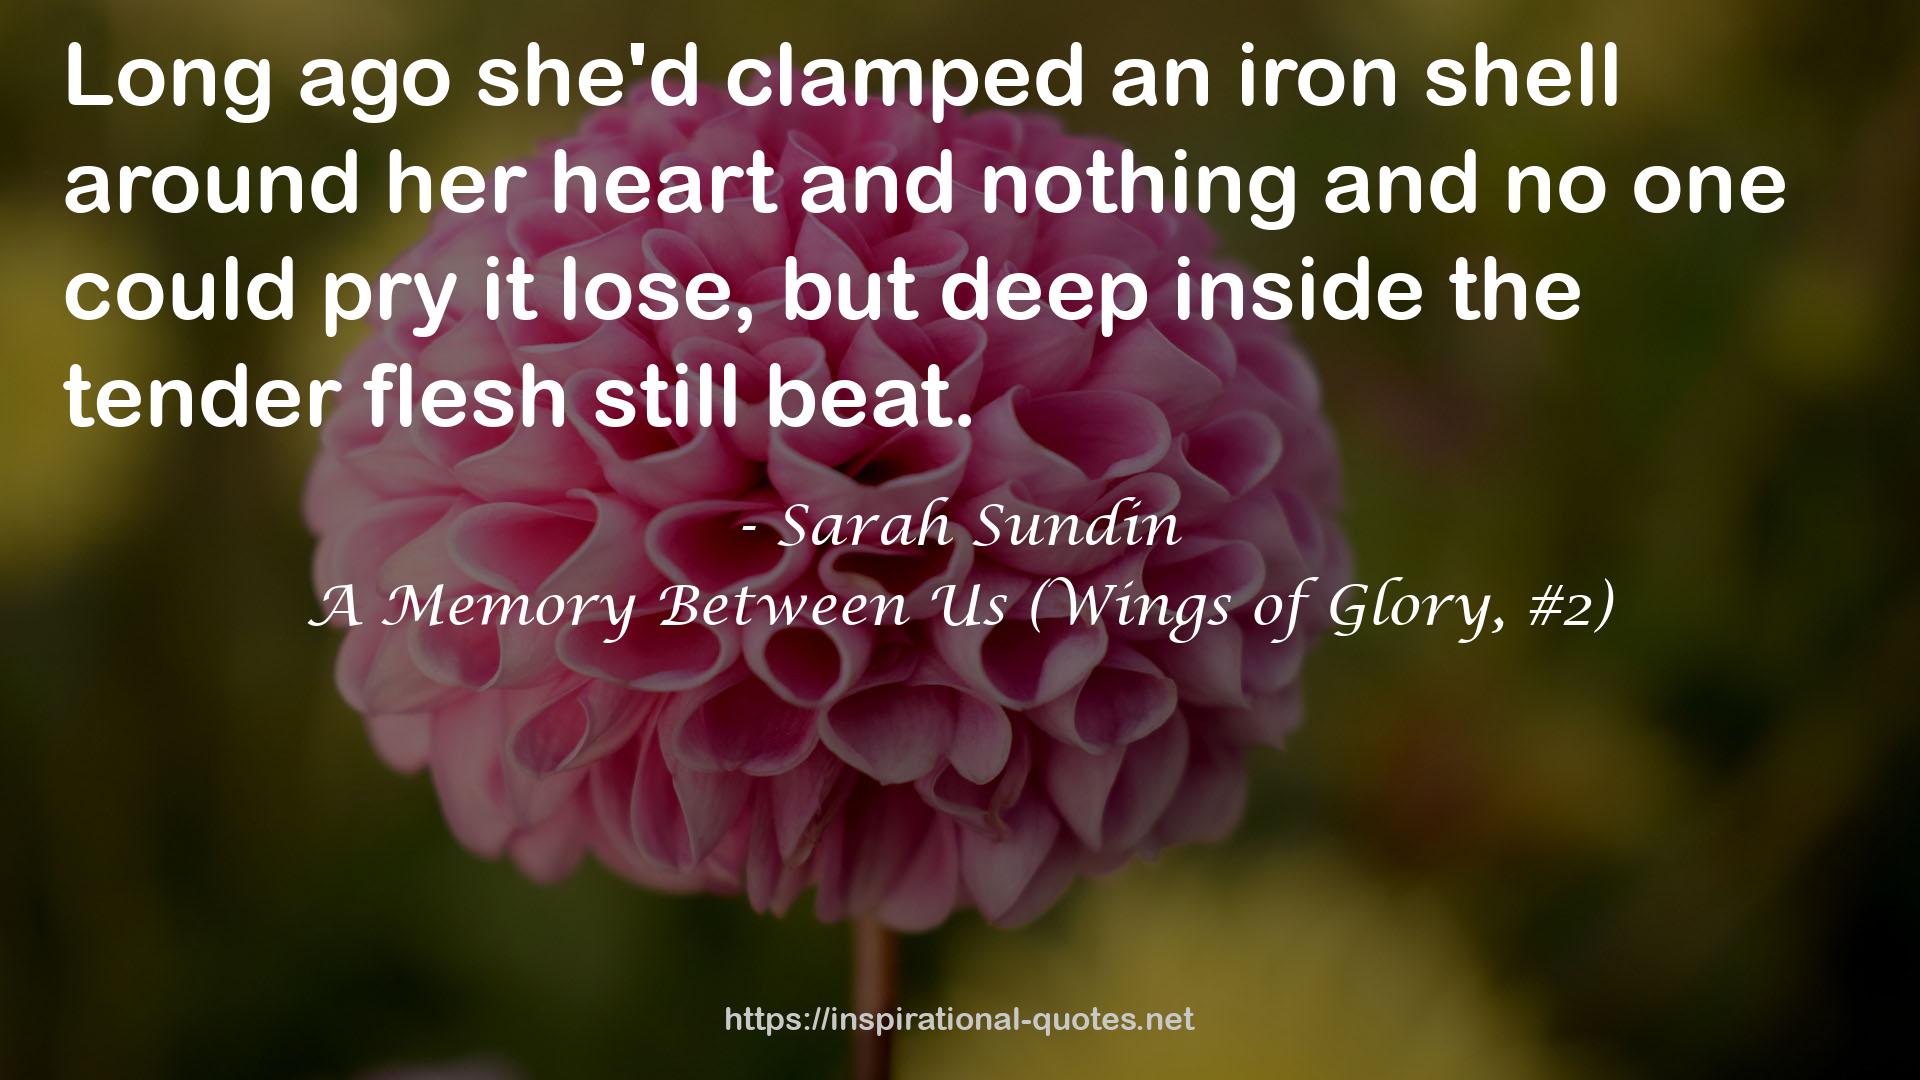 A Memory Between Us (Wings of Glory, #2) QUOTES